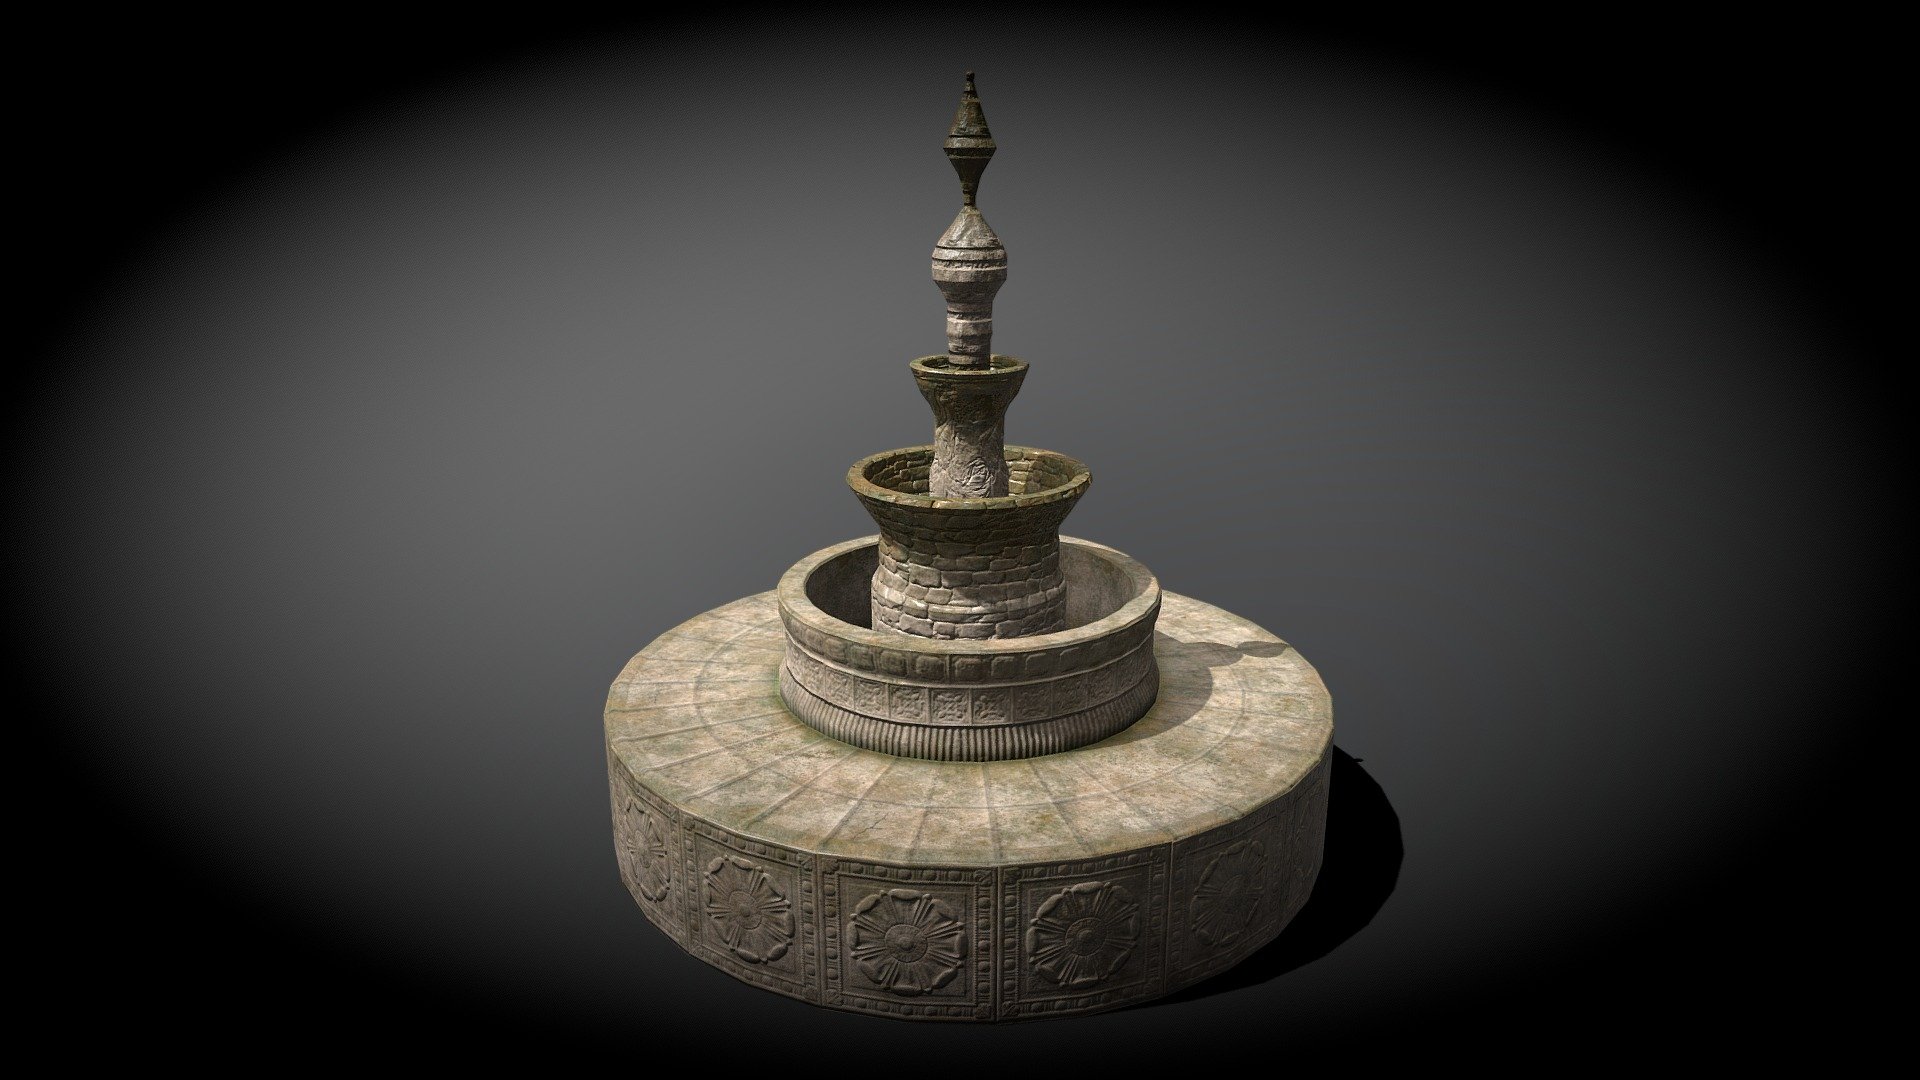 Medieval Garden Fountain. It has very little water to just give it a wet look on the stone. This way no need for animation but still get the wet look 3d model